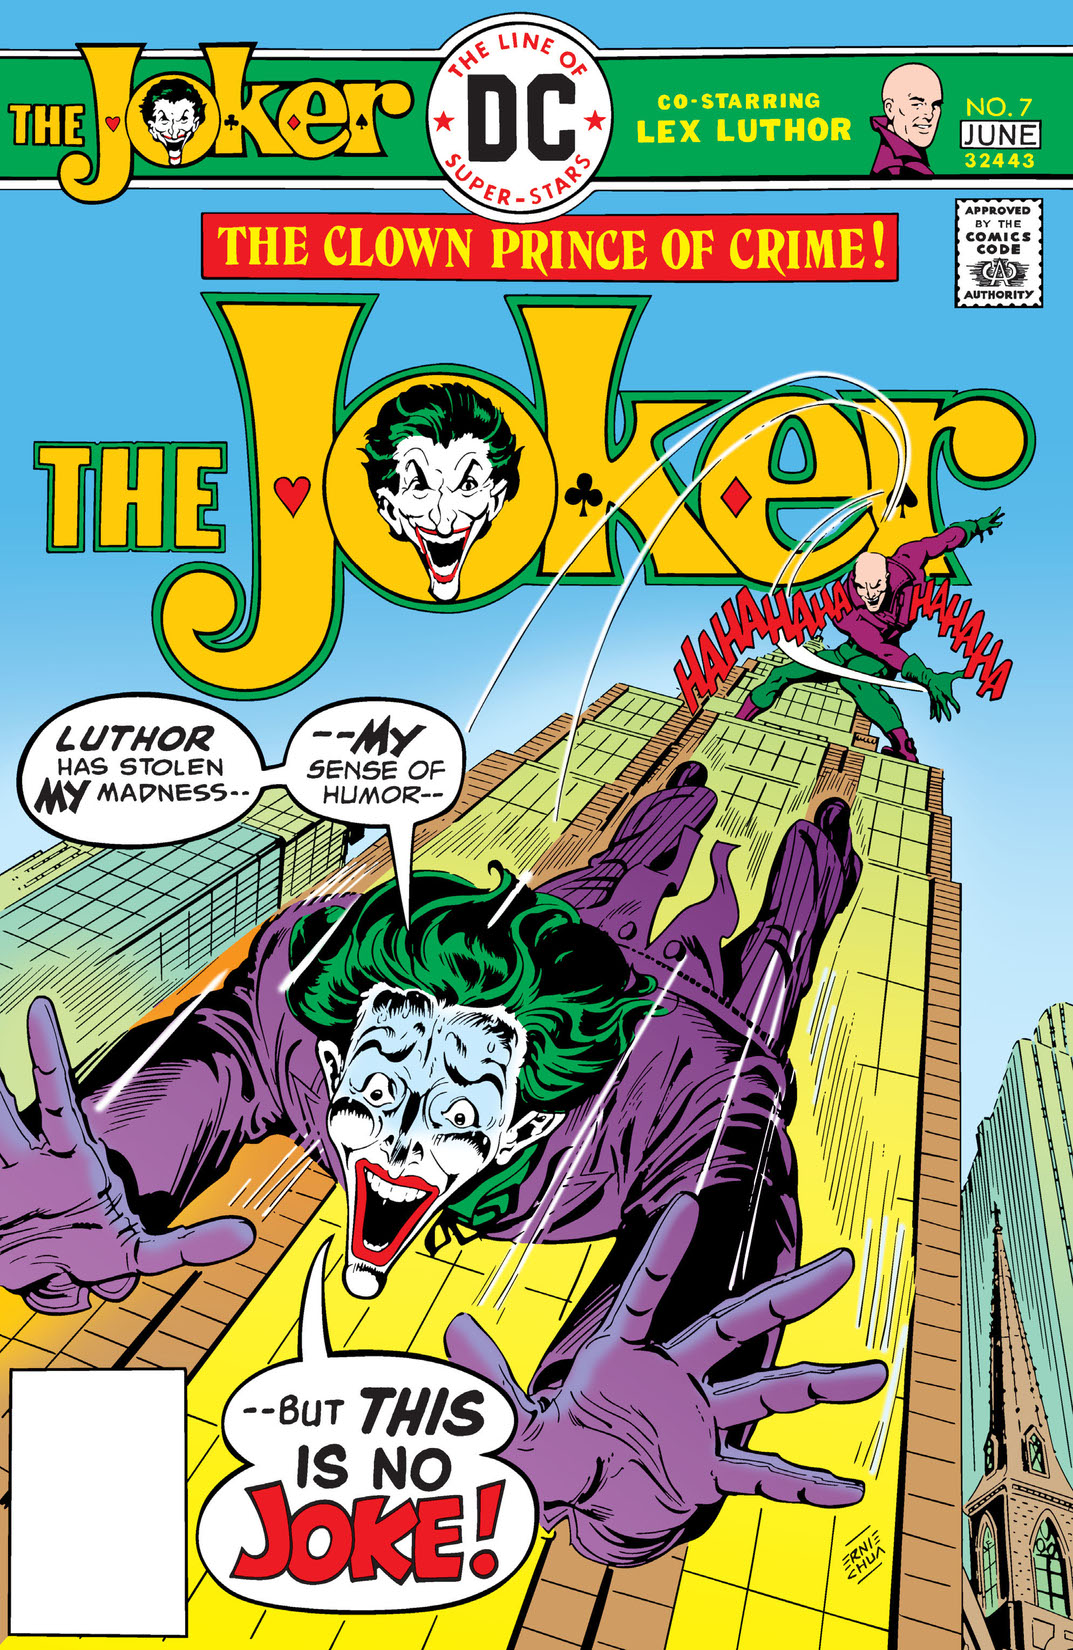 The Joker (1975-) #7 preview images